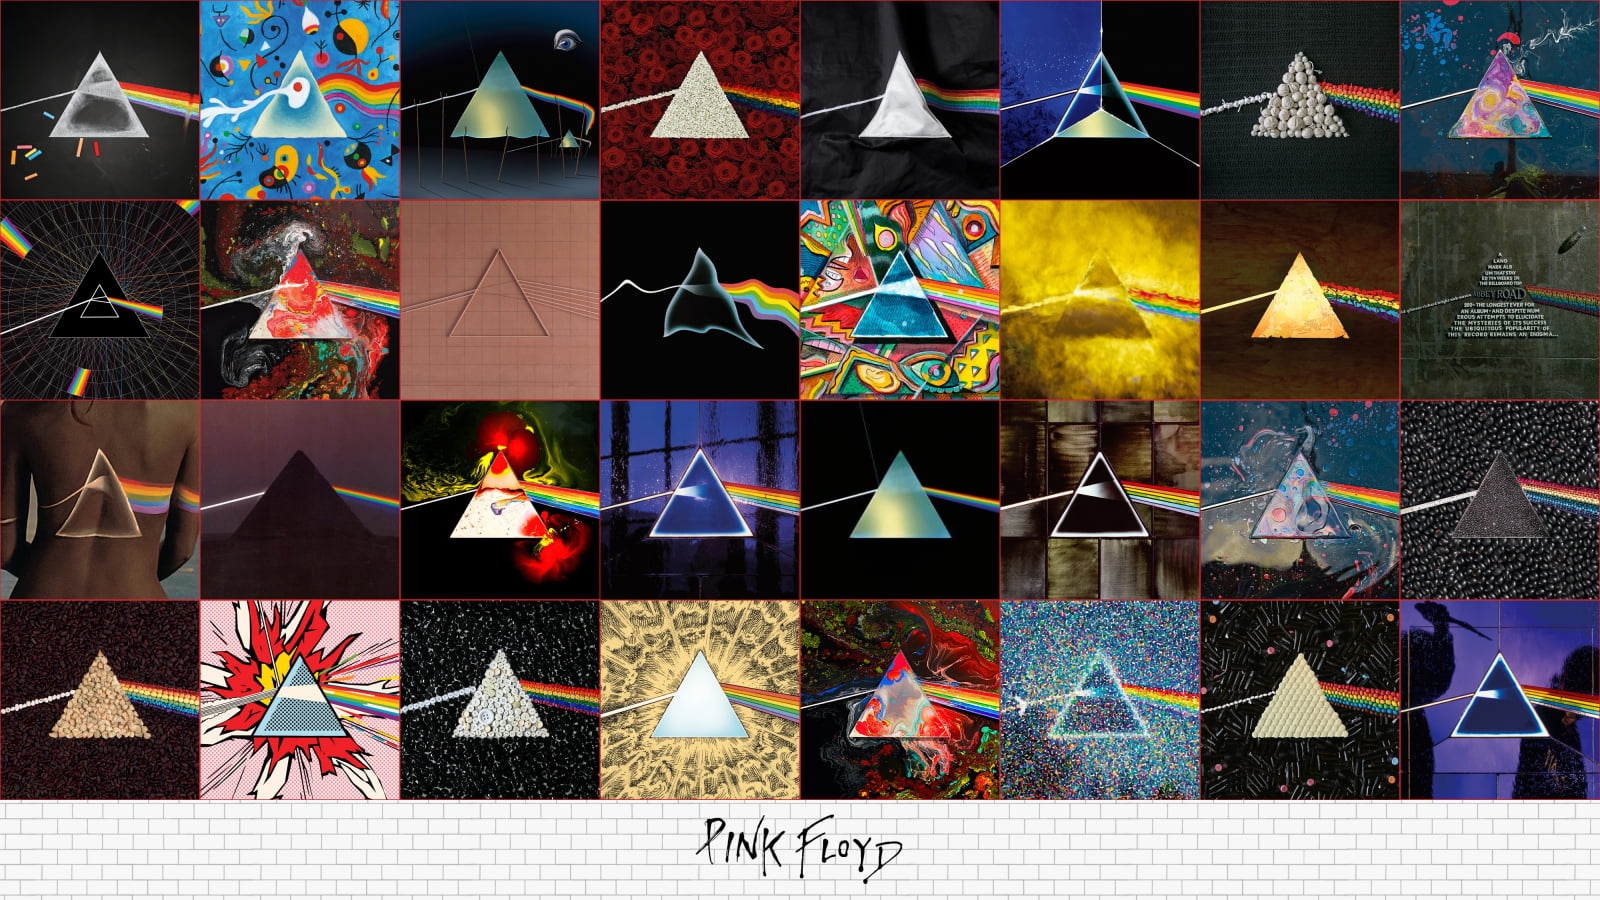 Pink Floyd, music, The Dark Side of the Moon, collage, multi colored